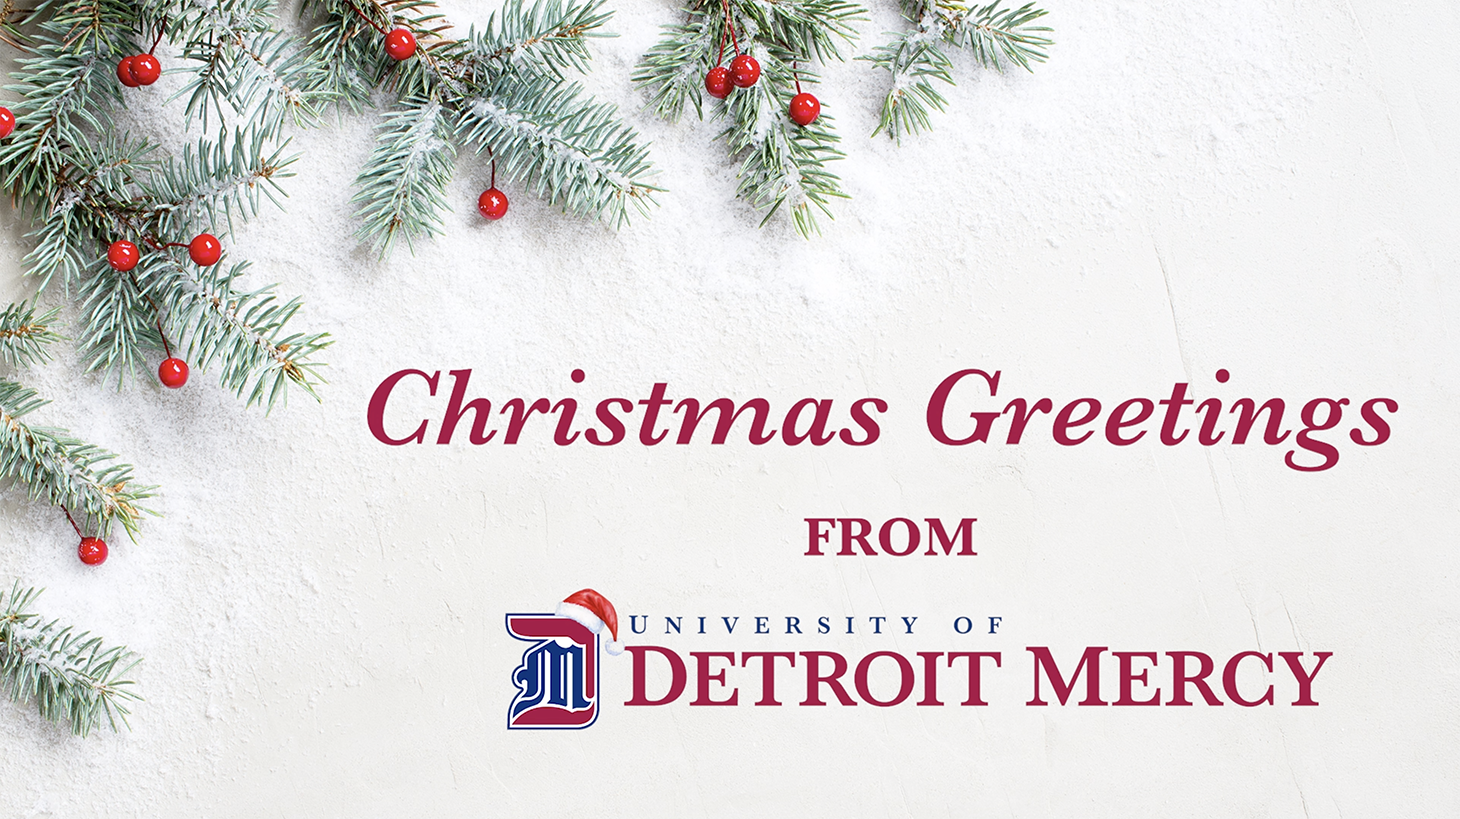 Christmas Greetings from University of Detroit Mercy graphic